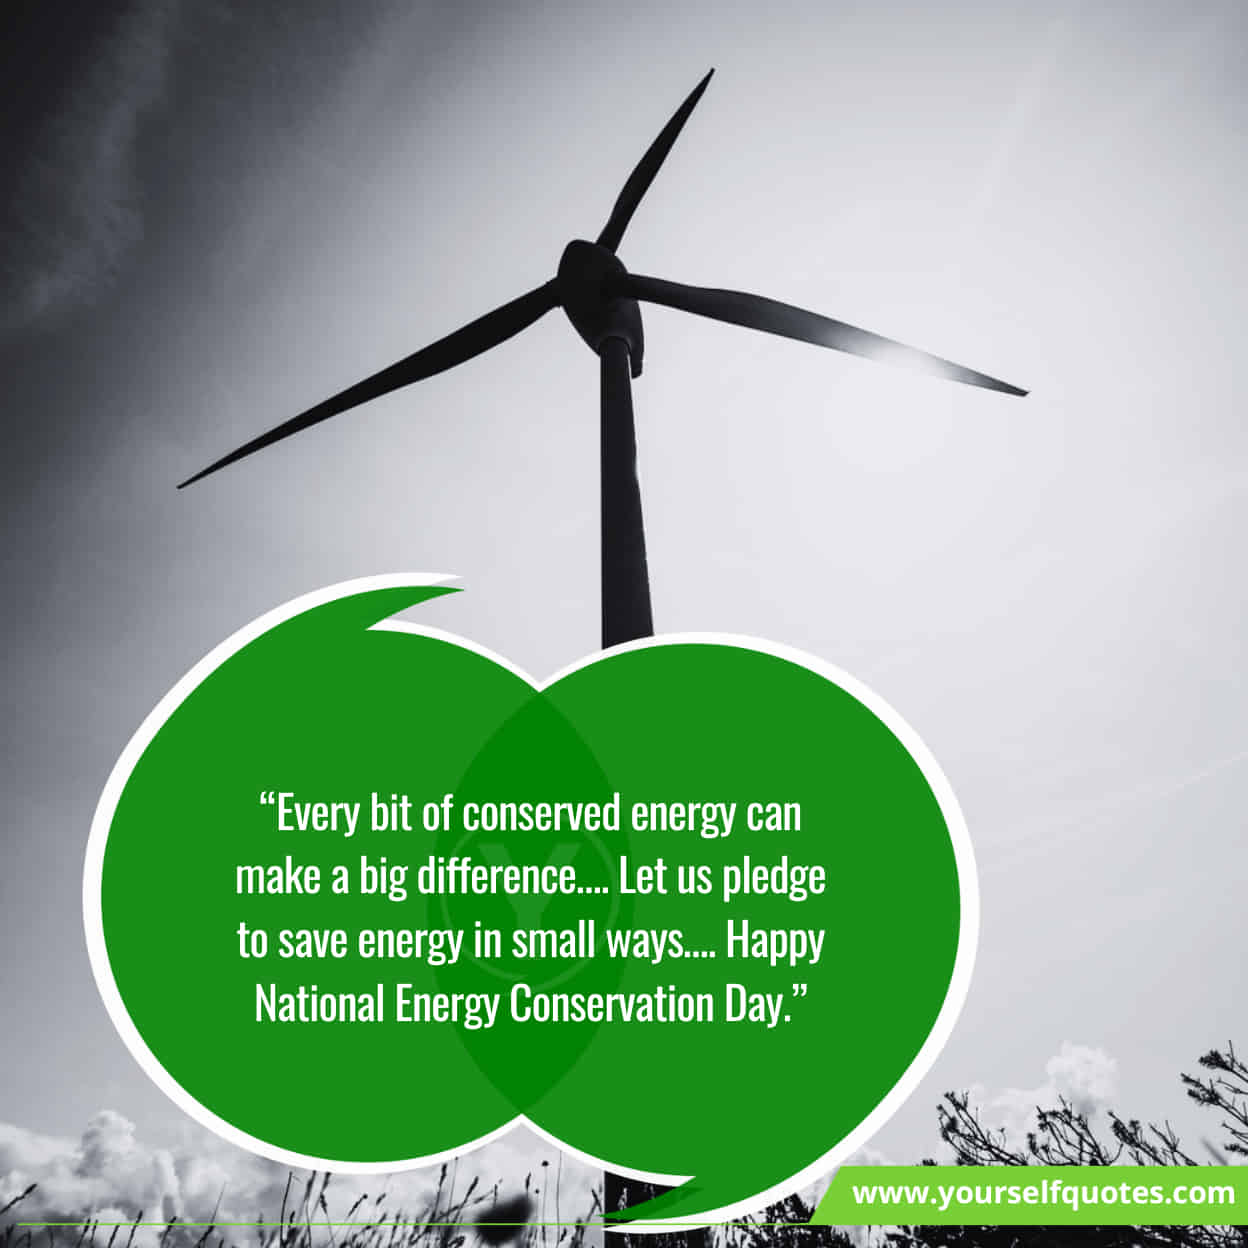 Inspiring National Energy Conservation Day Wishes